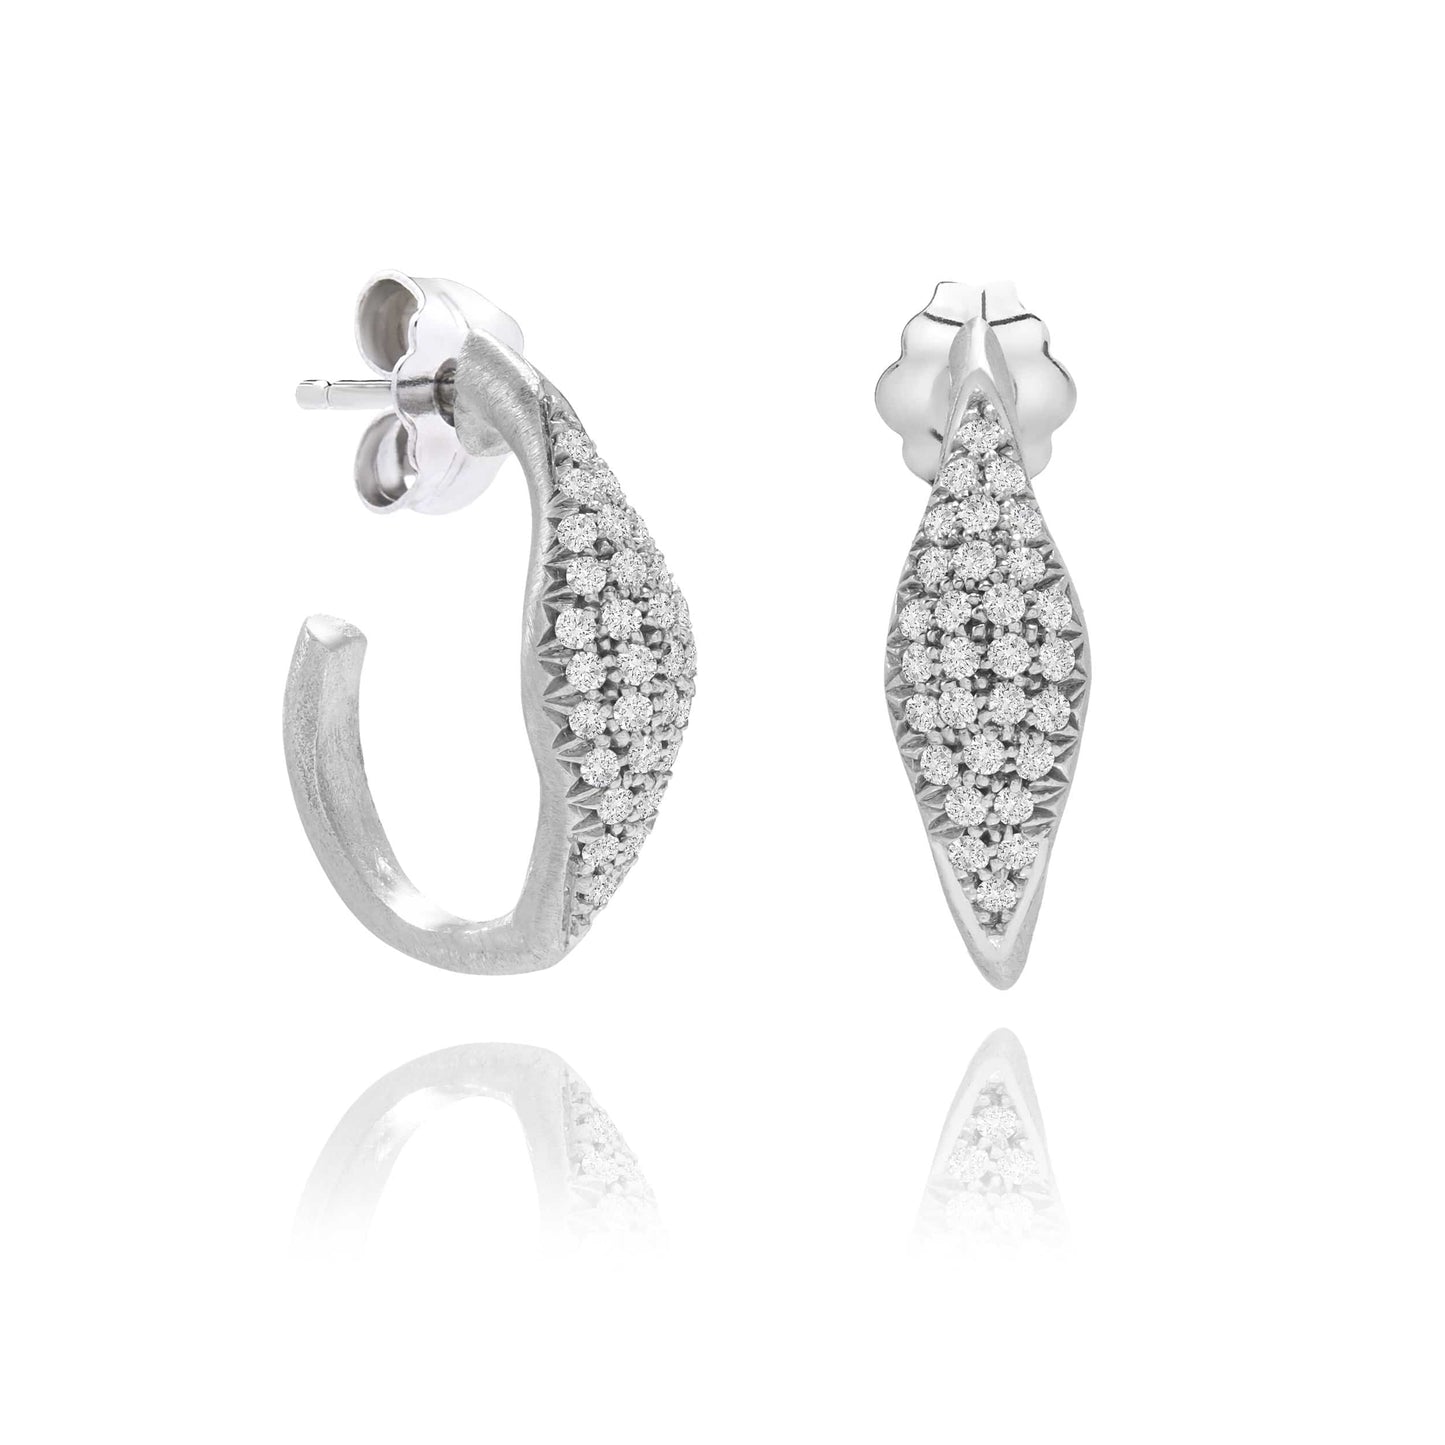 Dalia T Online Earrings Textured Gold Signature Collection 14KT White Gold 15mm Pave Diamond Hoop Earrings